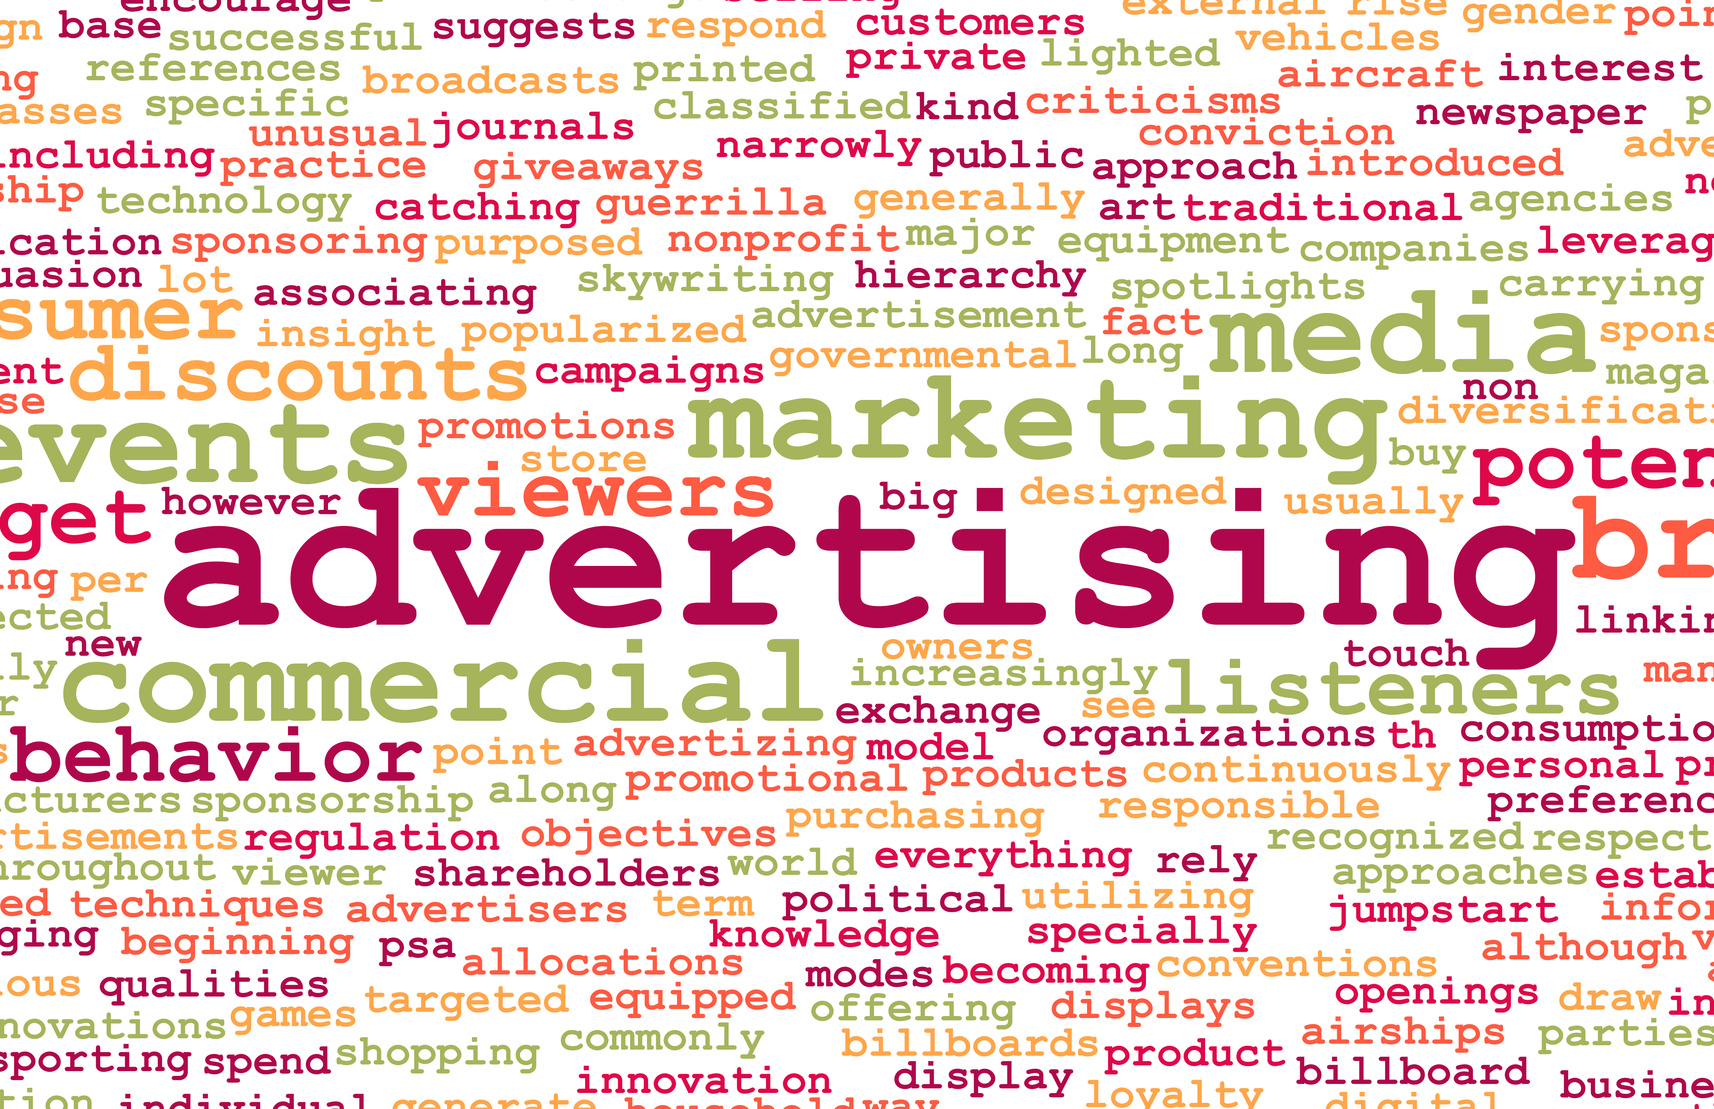 The Death of Advertising and the Future of Advertising